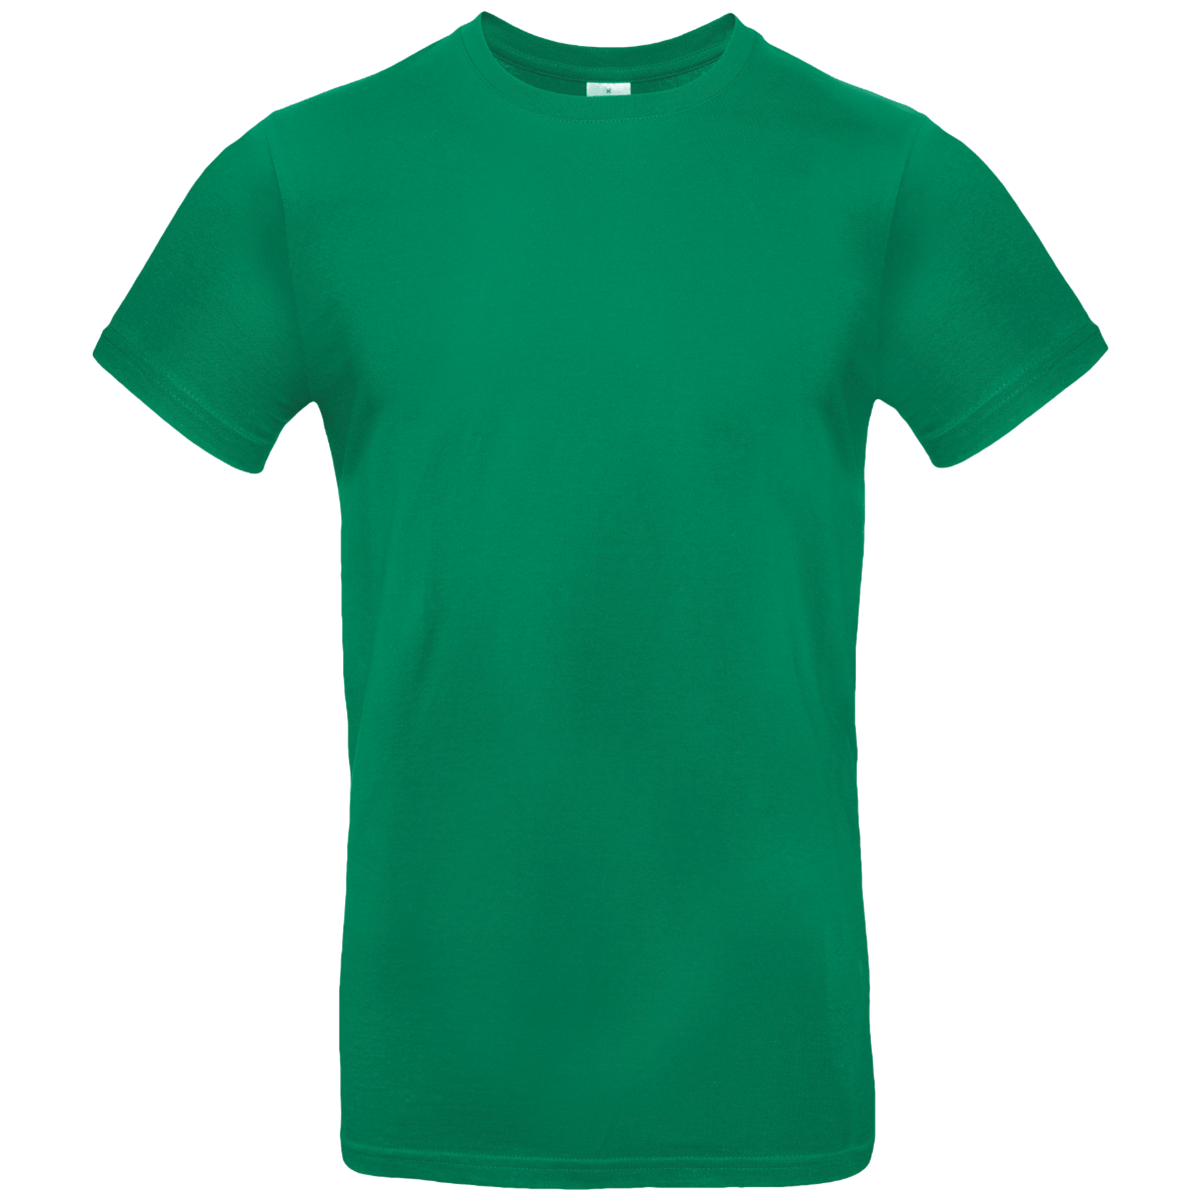 T-Shirt B&c 190 Personnalisable Sur Tunetoo Kelly Green